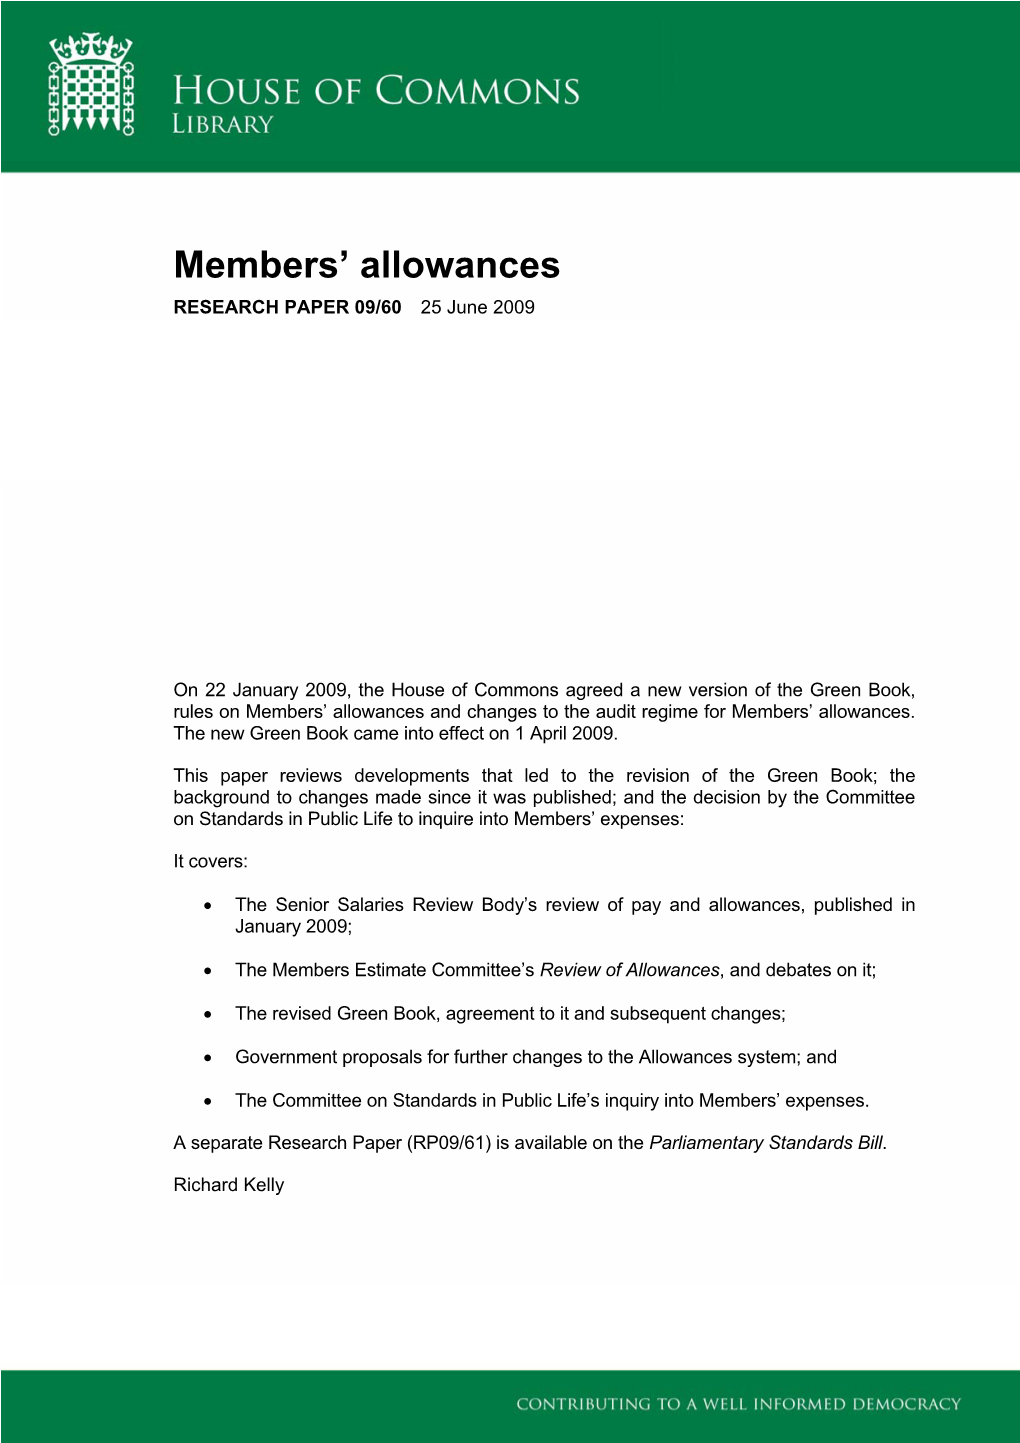 Members' Allowances, Whereas the Finance and Services Committee Has Always Referred to the Administration Estimate, Which Is Different